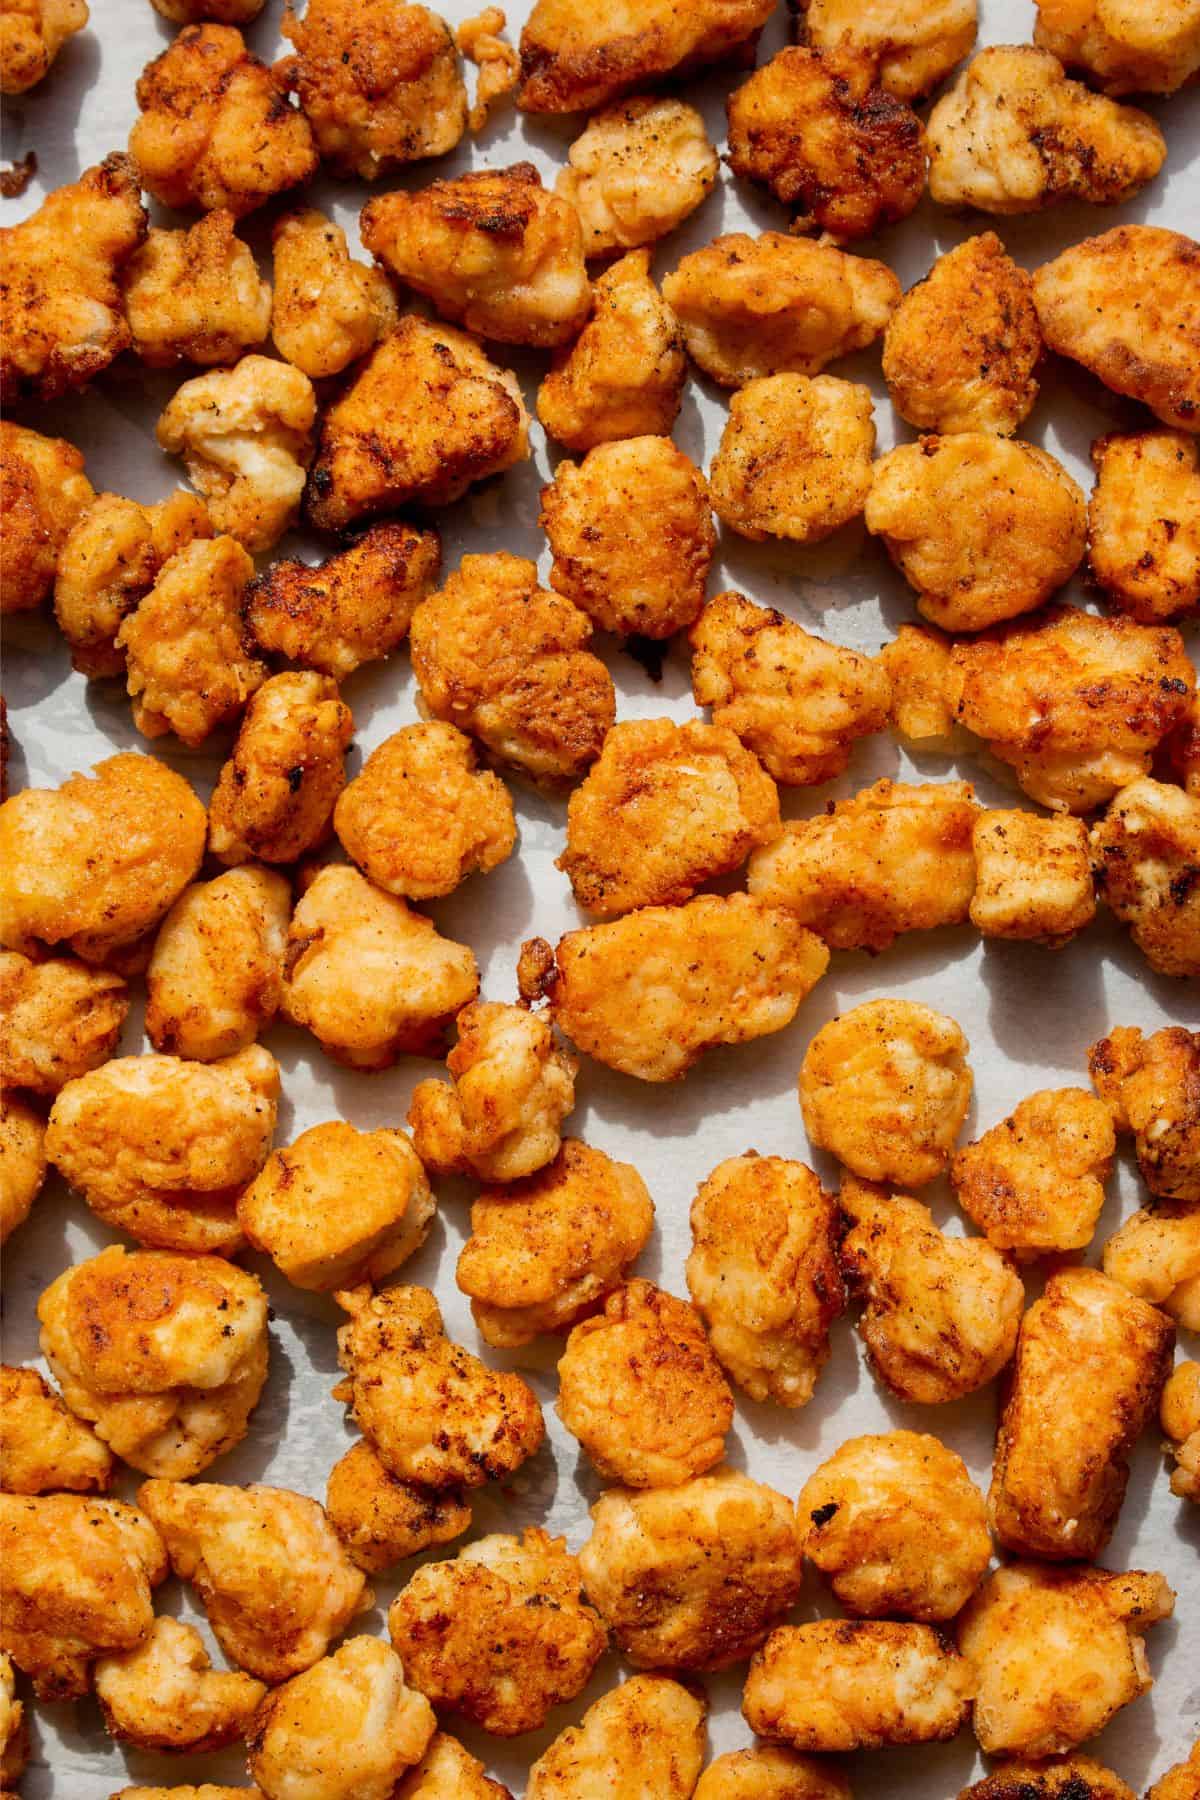 Close up of pieces of popcorn chicken pieces spread out over a stainless steel baking tray.